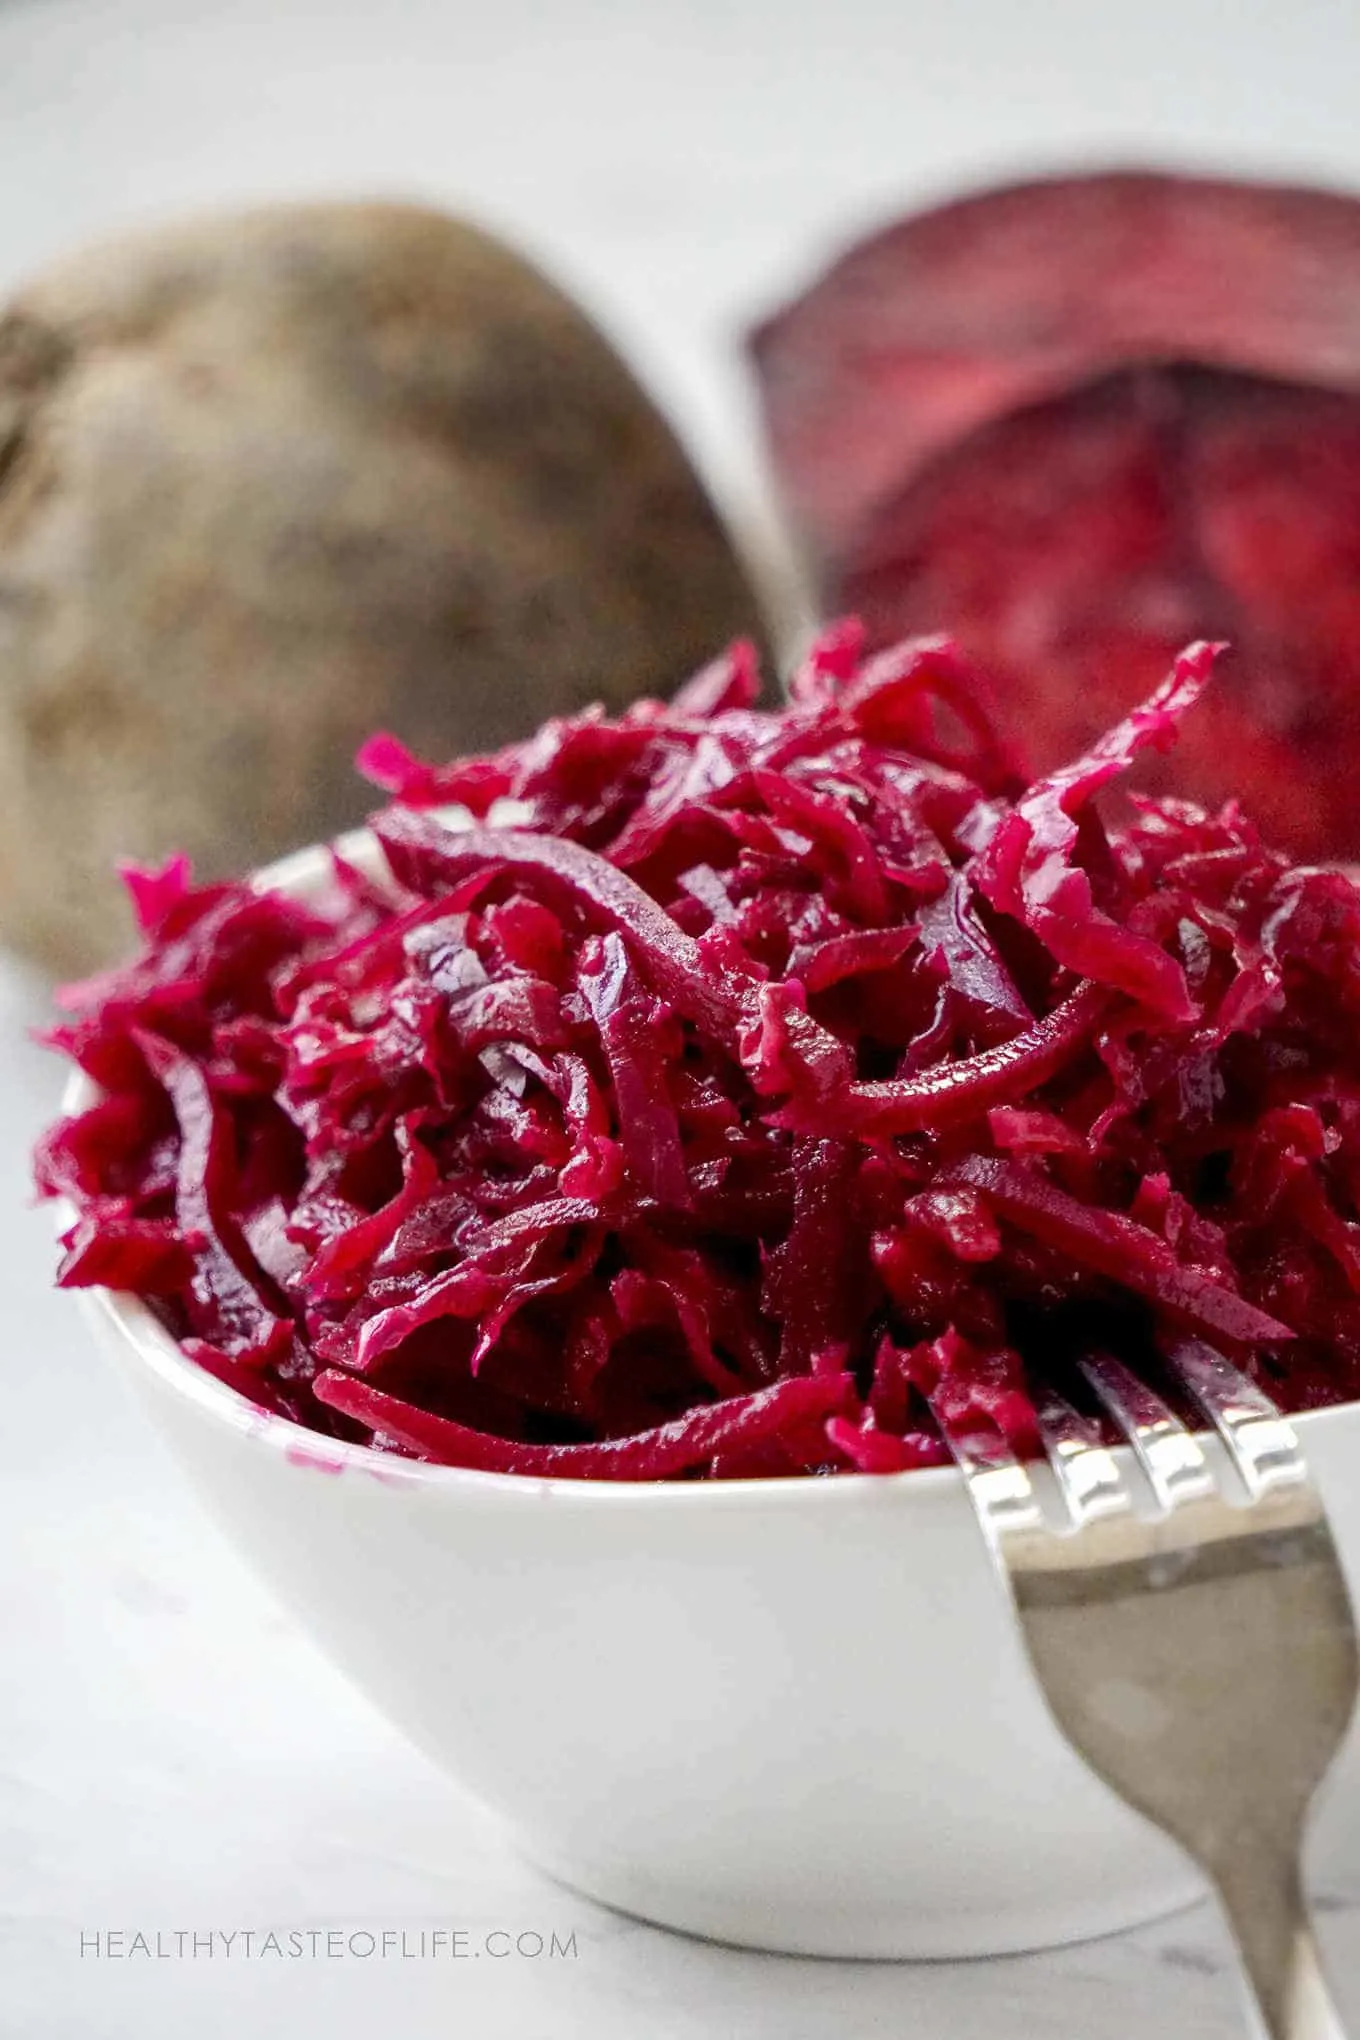 DIY Lacto fermented beets and cabbage recipe with beetroot, ginger, garlic and apple.